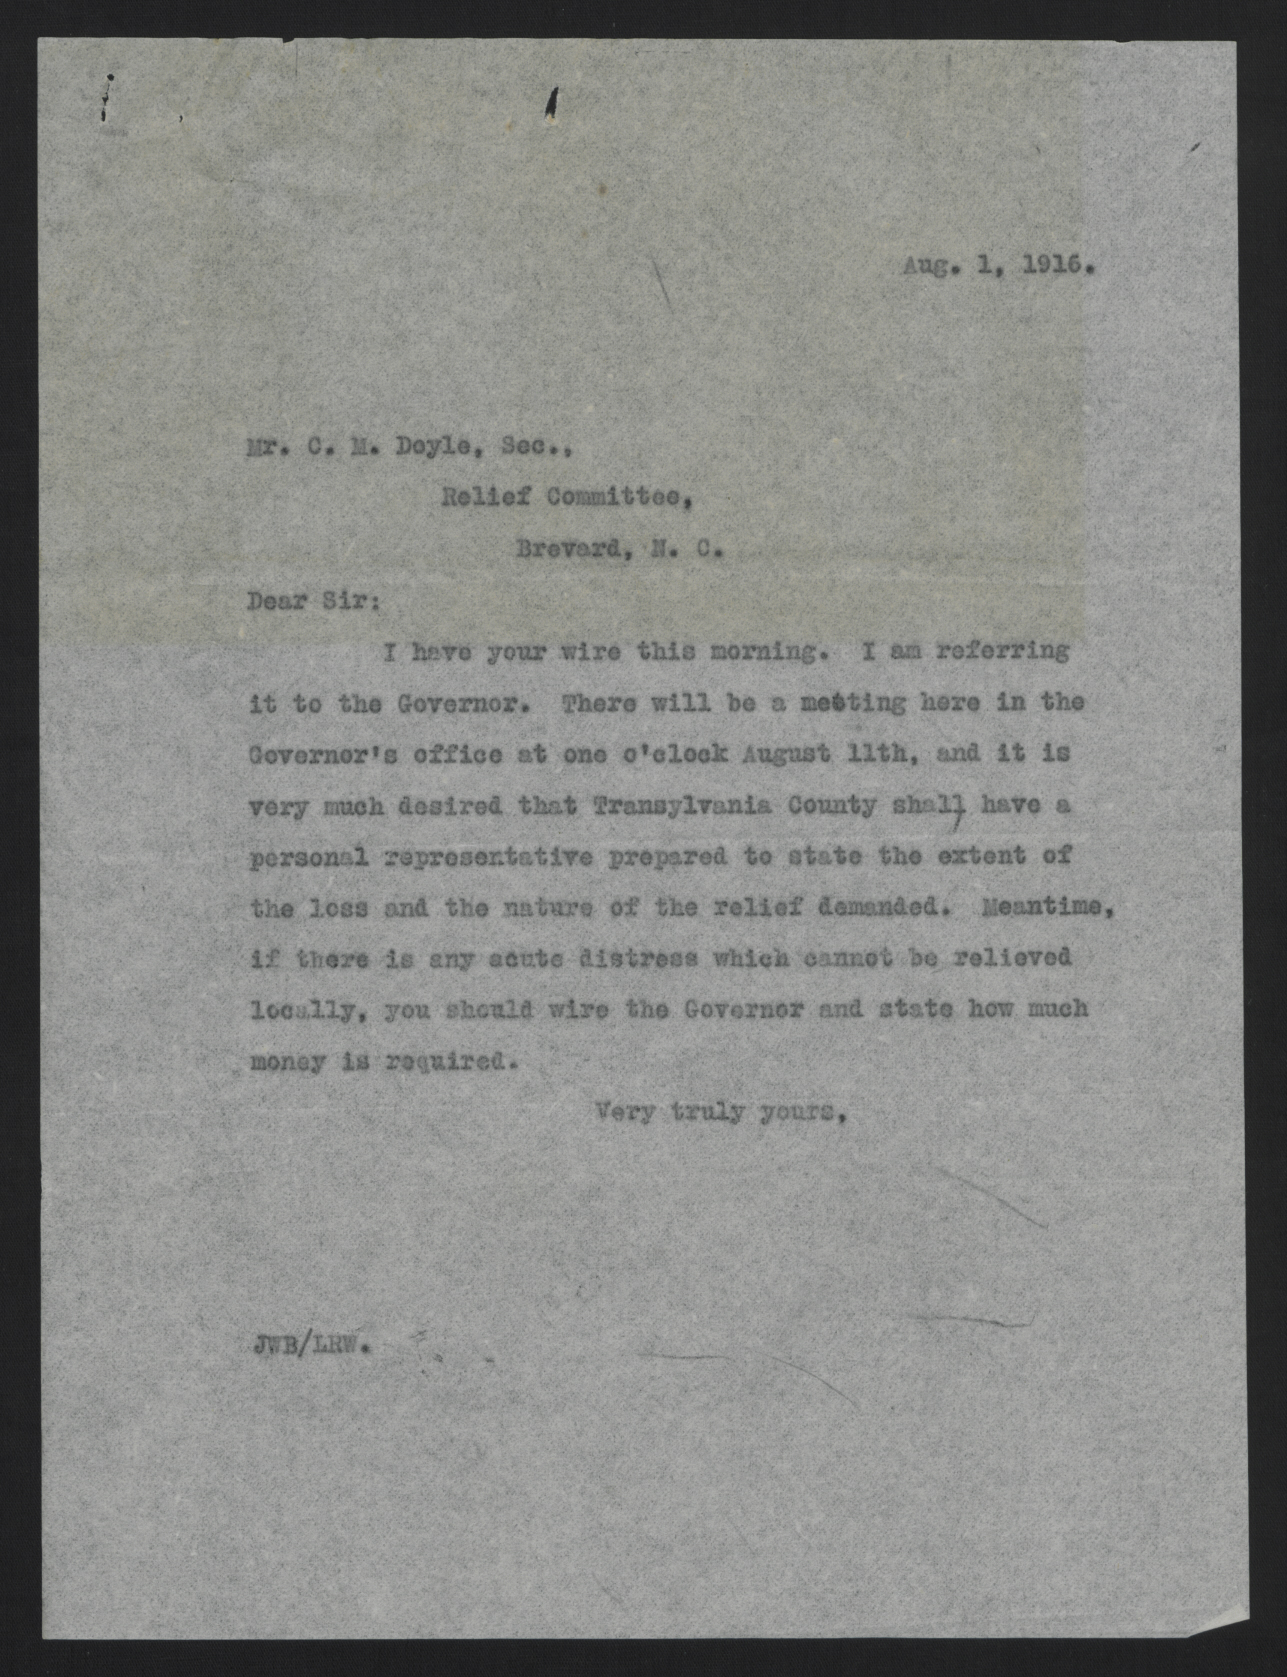 Letter from Bailey to Doyle, August 1, 1916